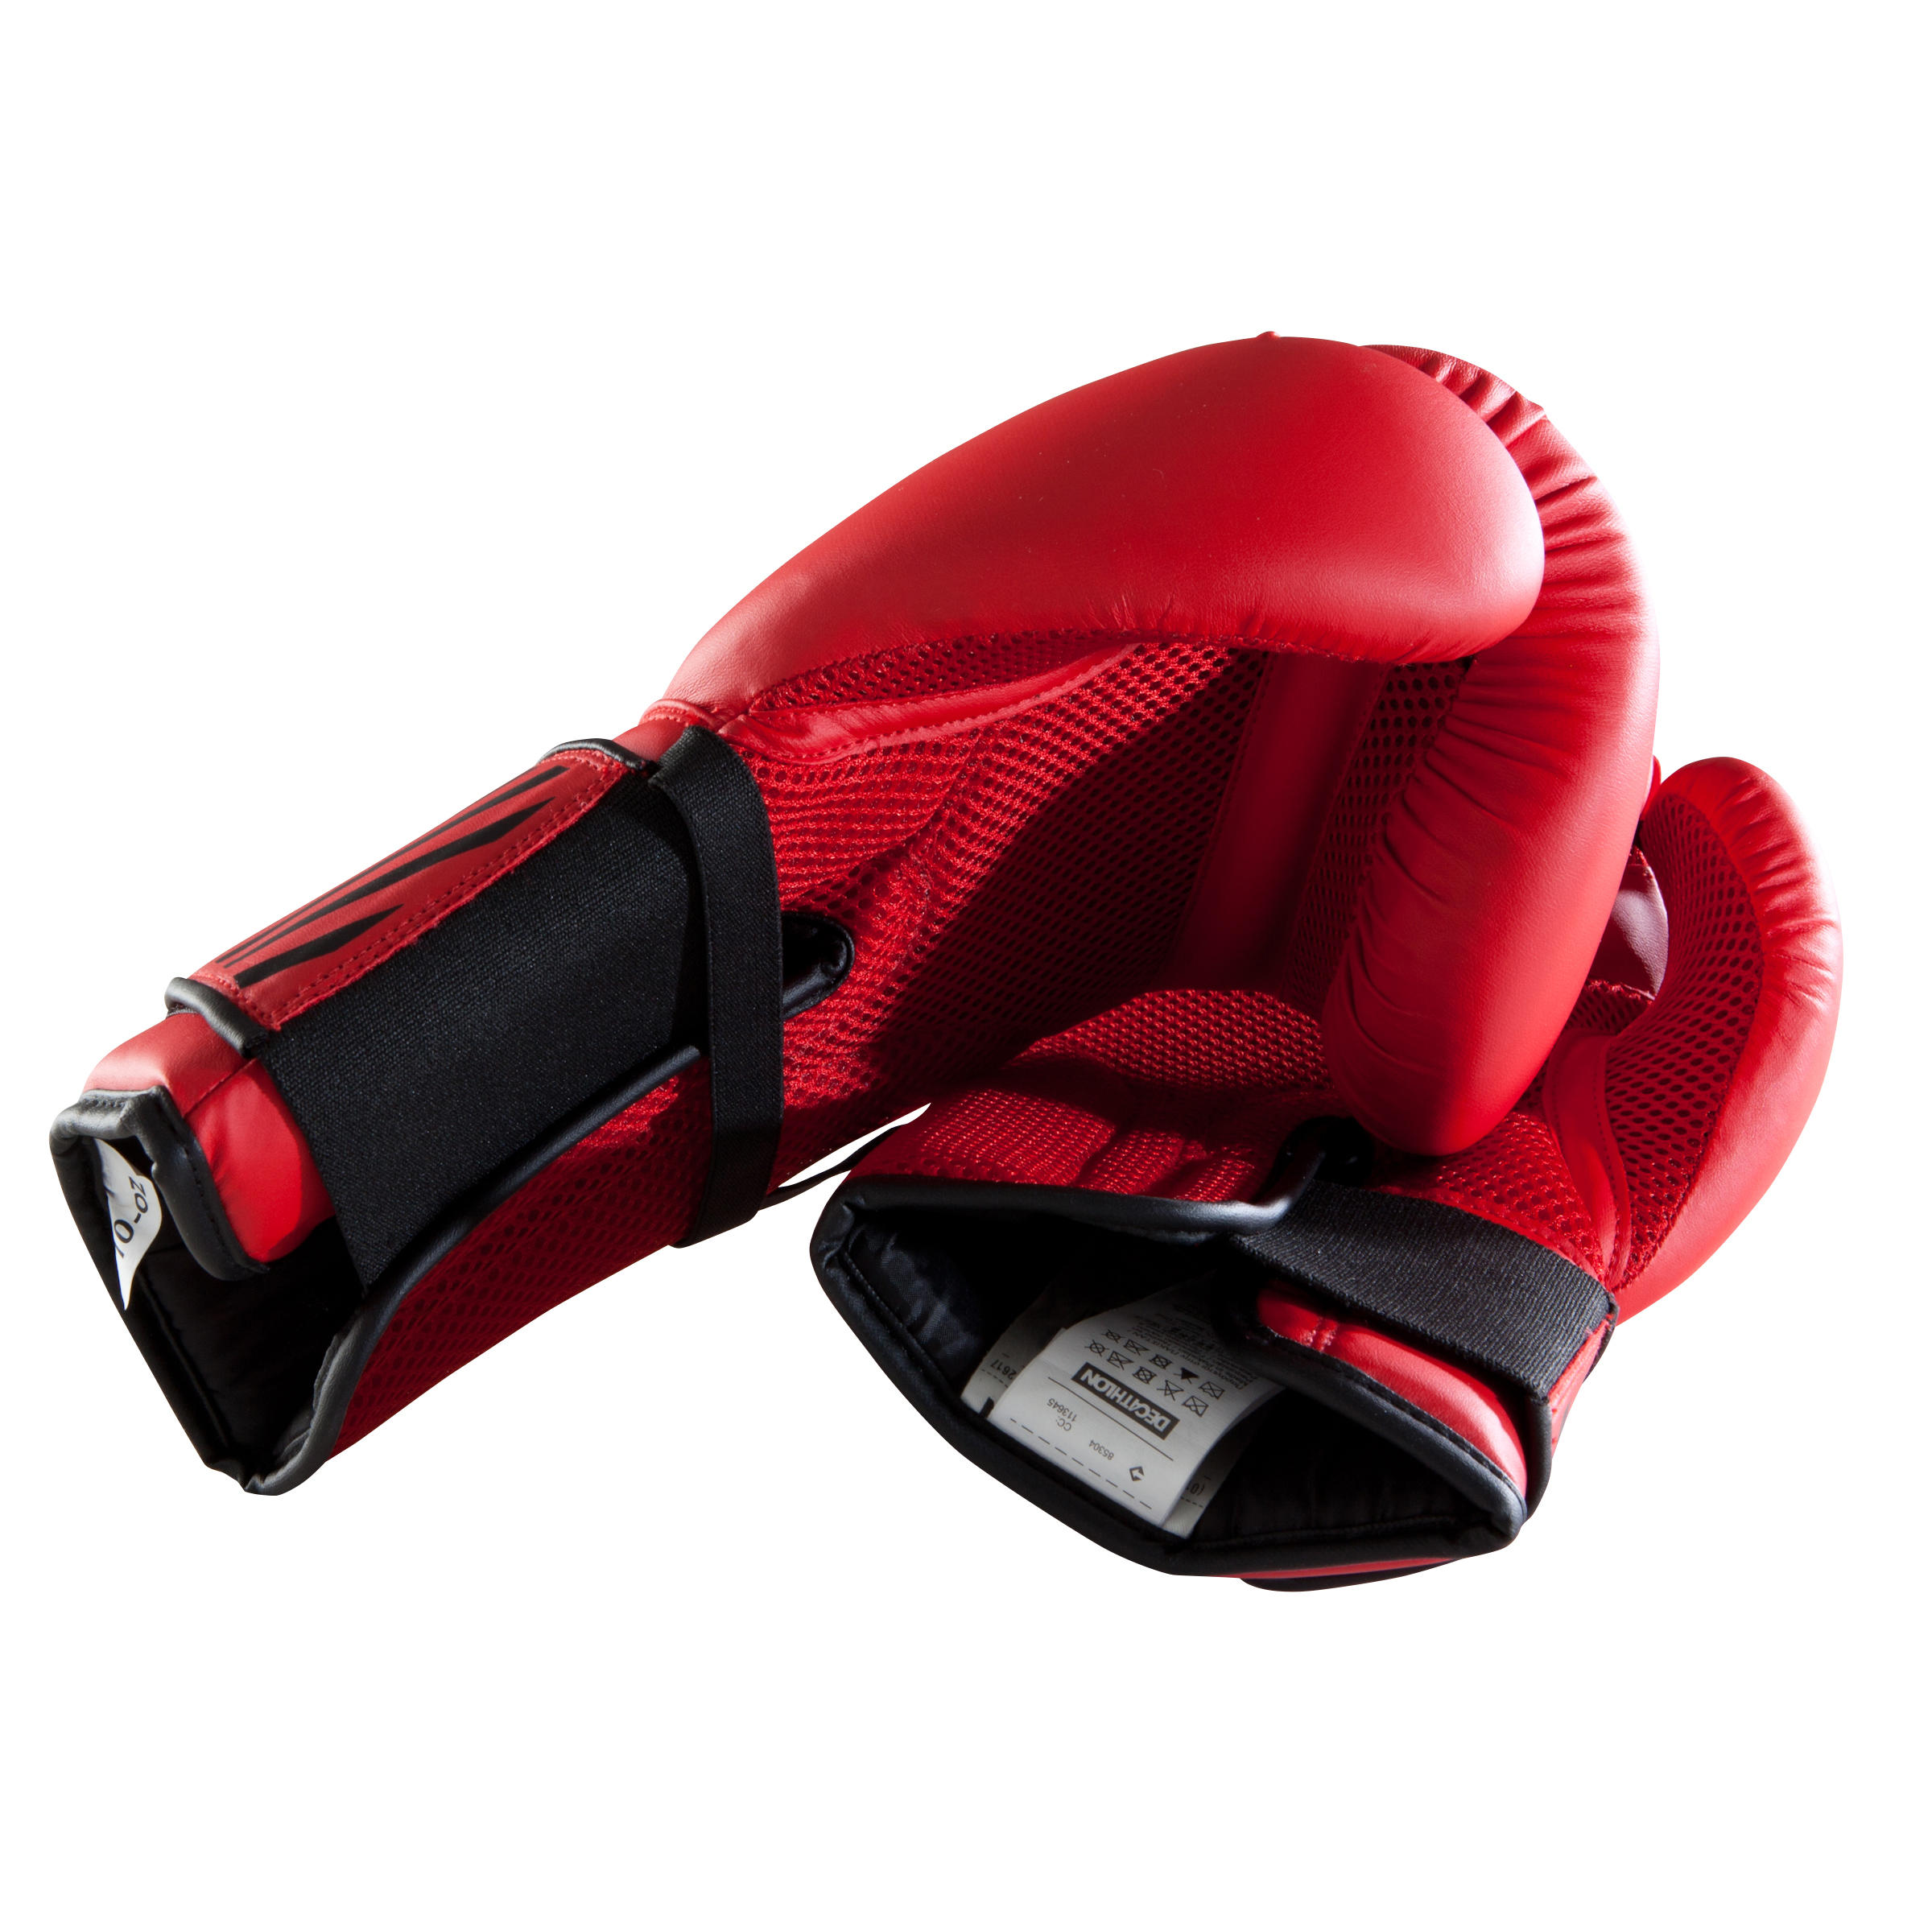 GREAT VALUE BOXING GEAR AT LOW BUDGET PRICES FROM DECATHLON - YouTube